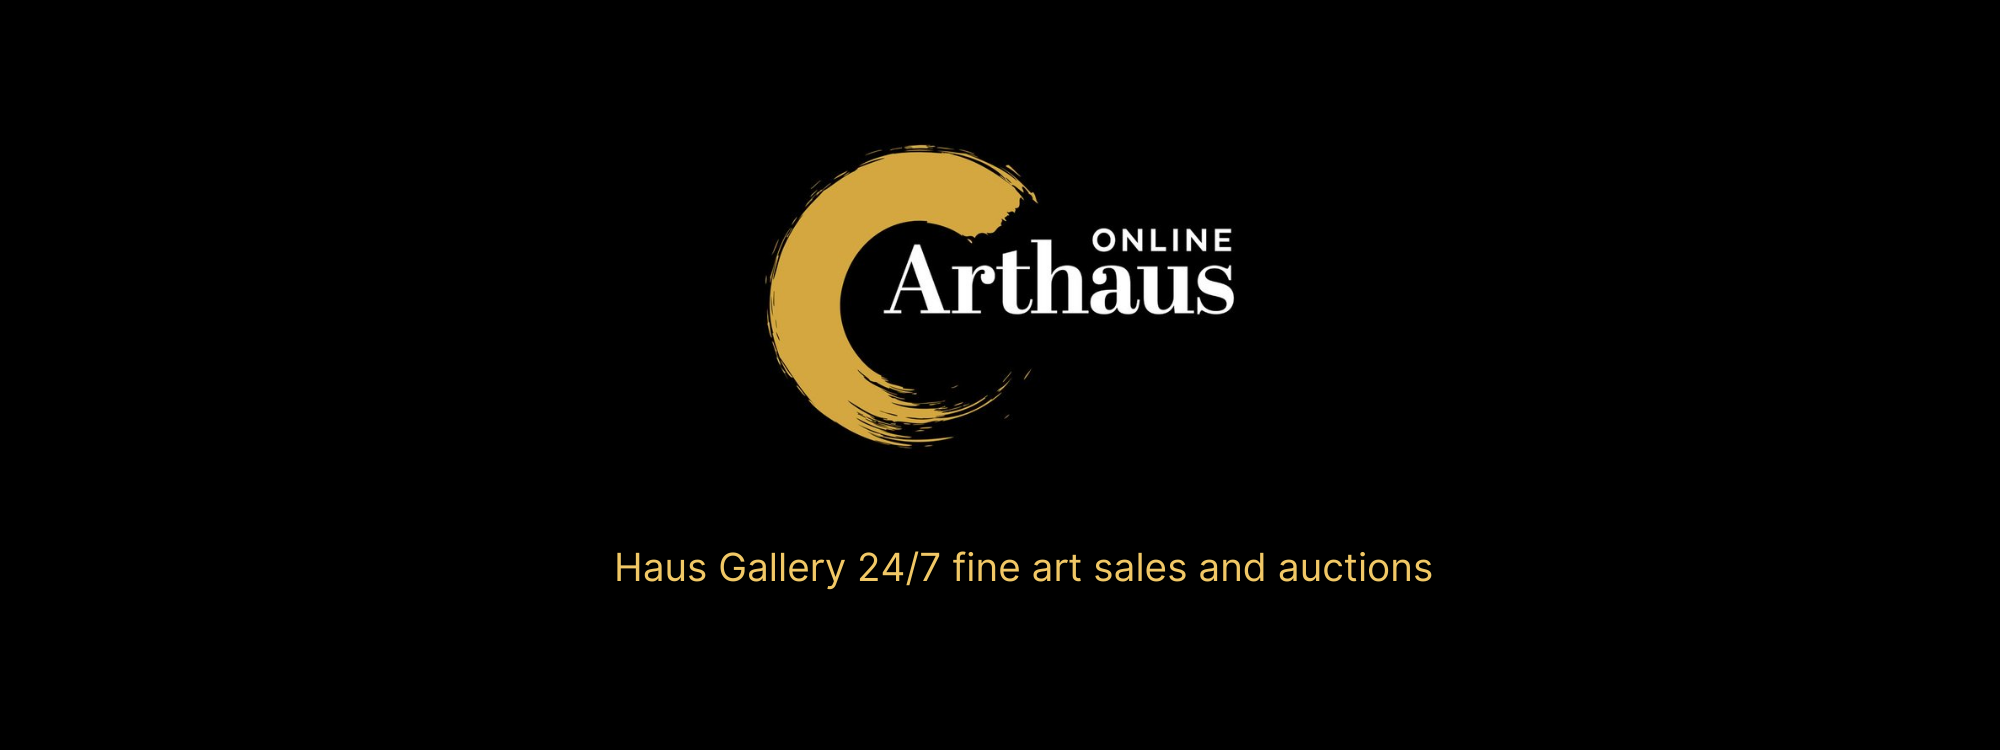 Haus_Gallery_247_fine_art_sales_and_auctions.png